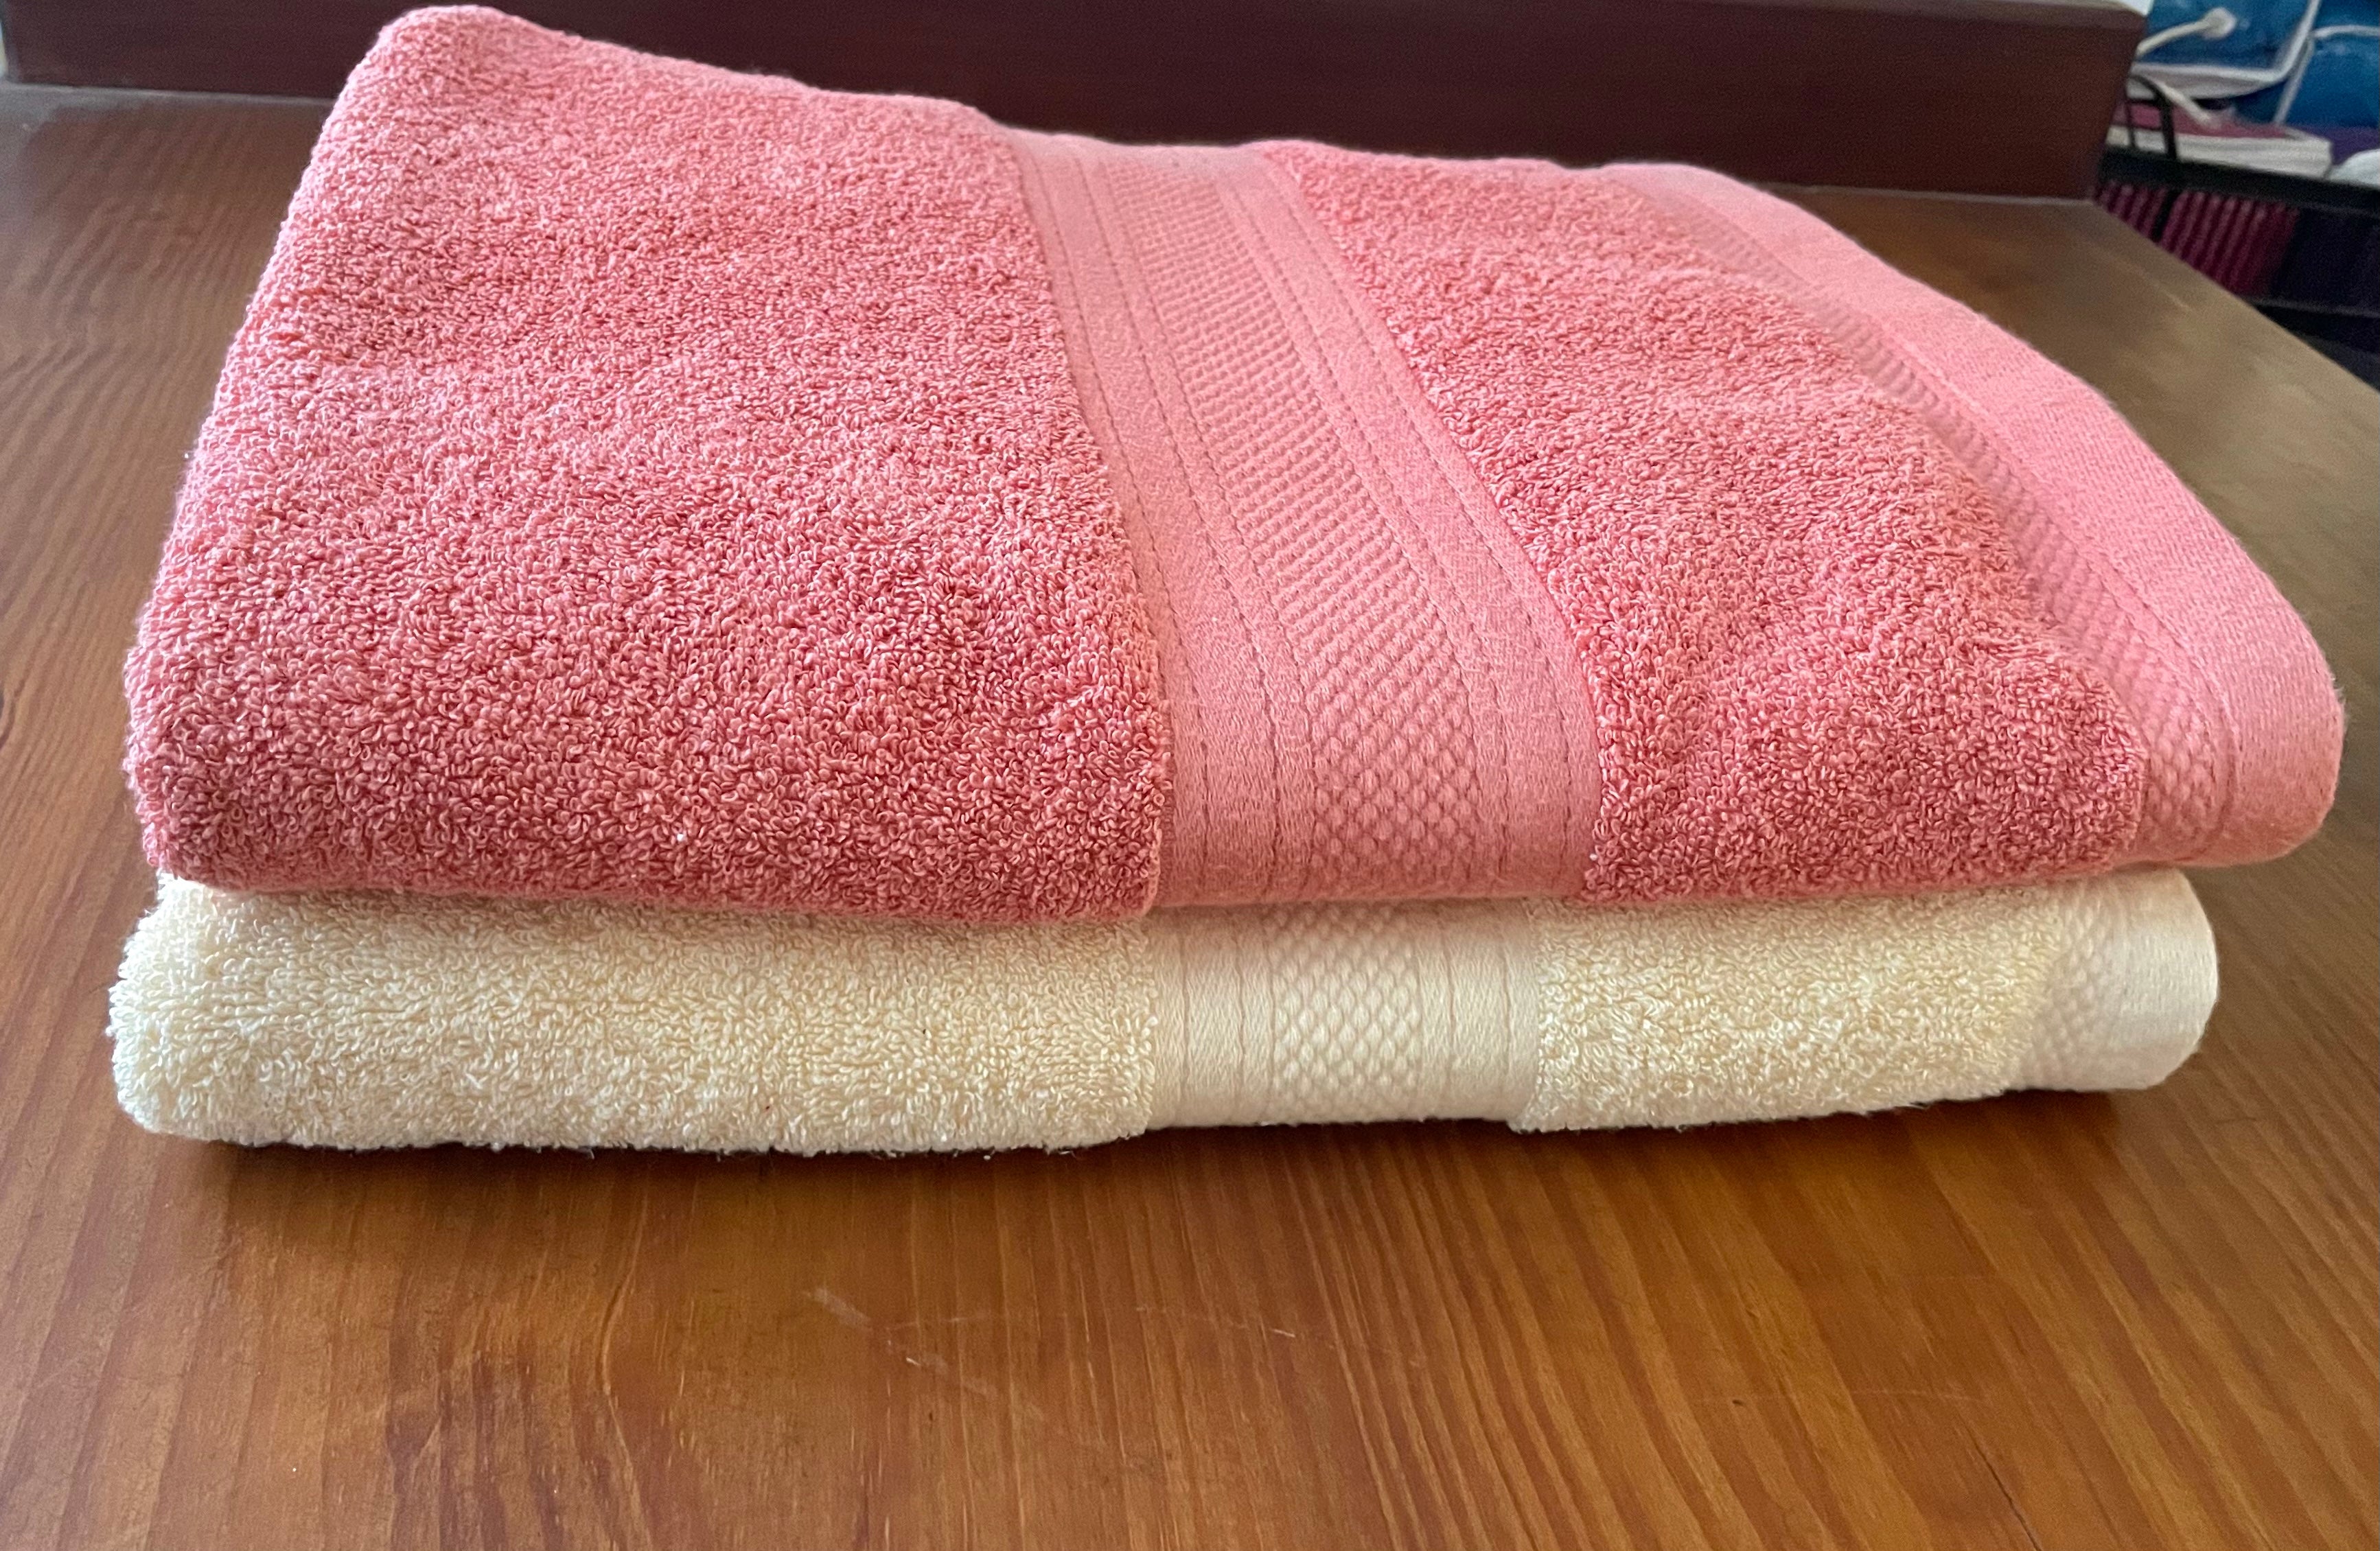 500g Cotton Towels, Bath Sheets - Priced individually